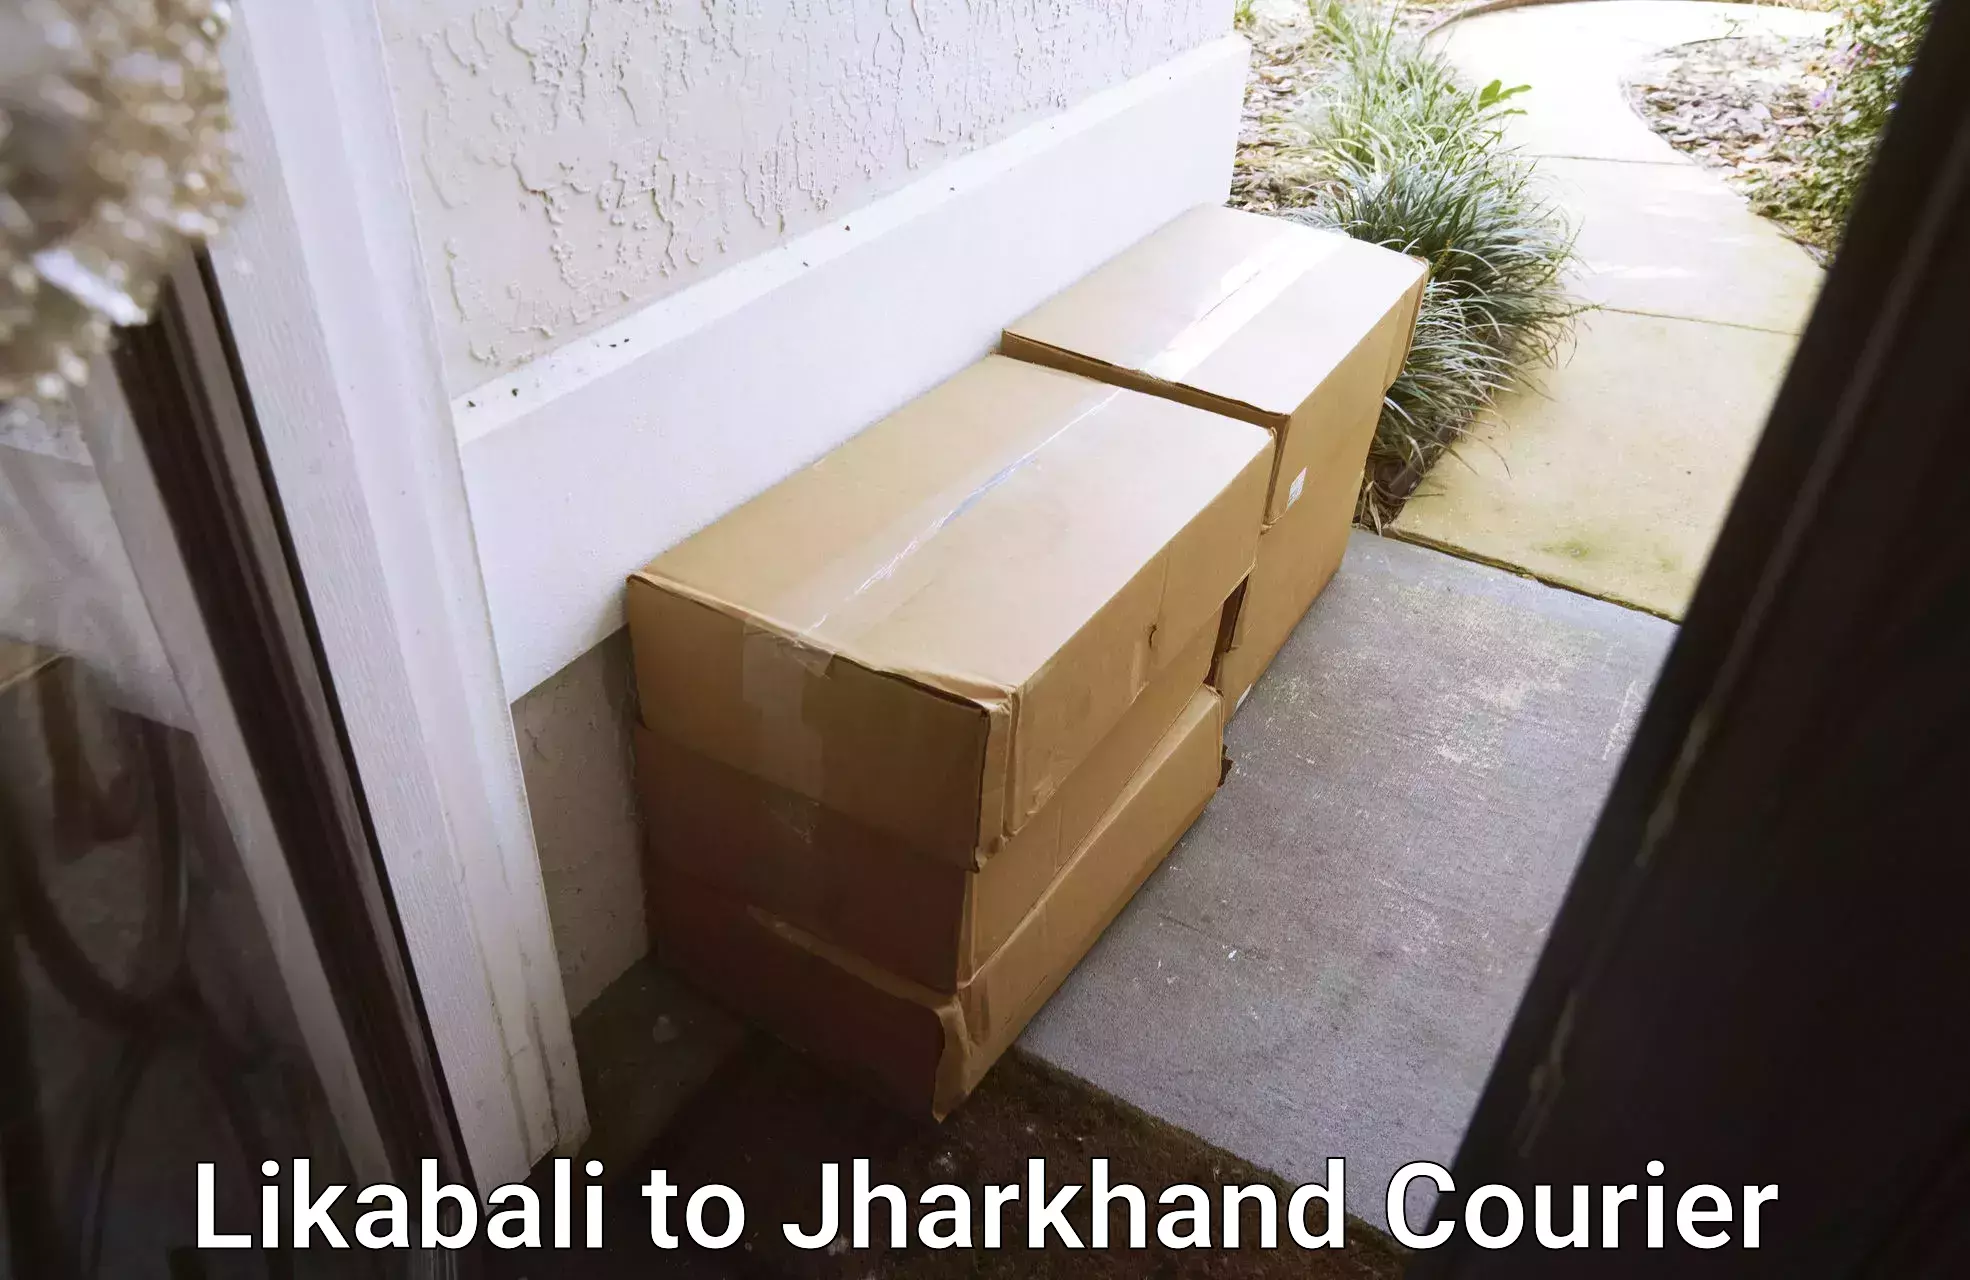 Express package services Likabali to Jharkhand